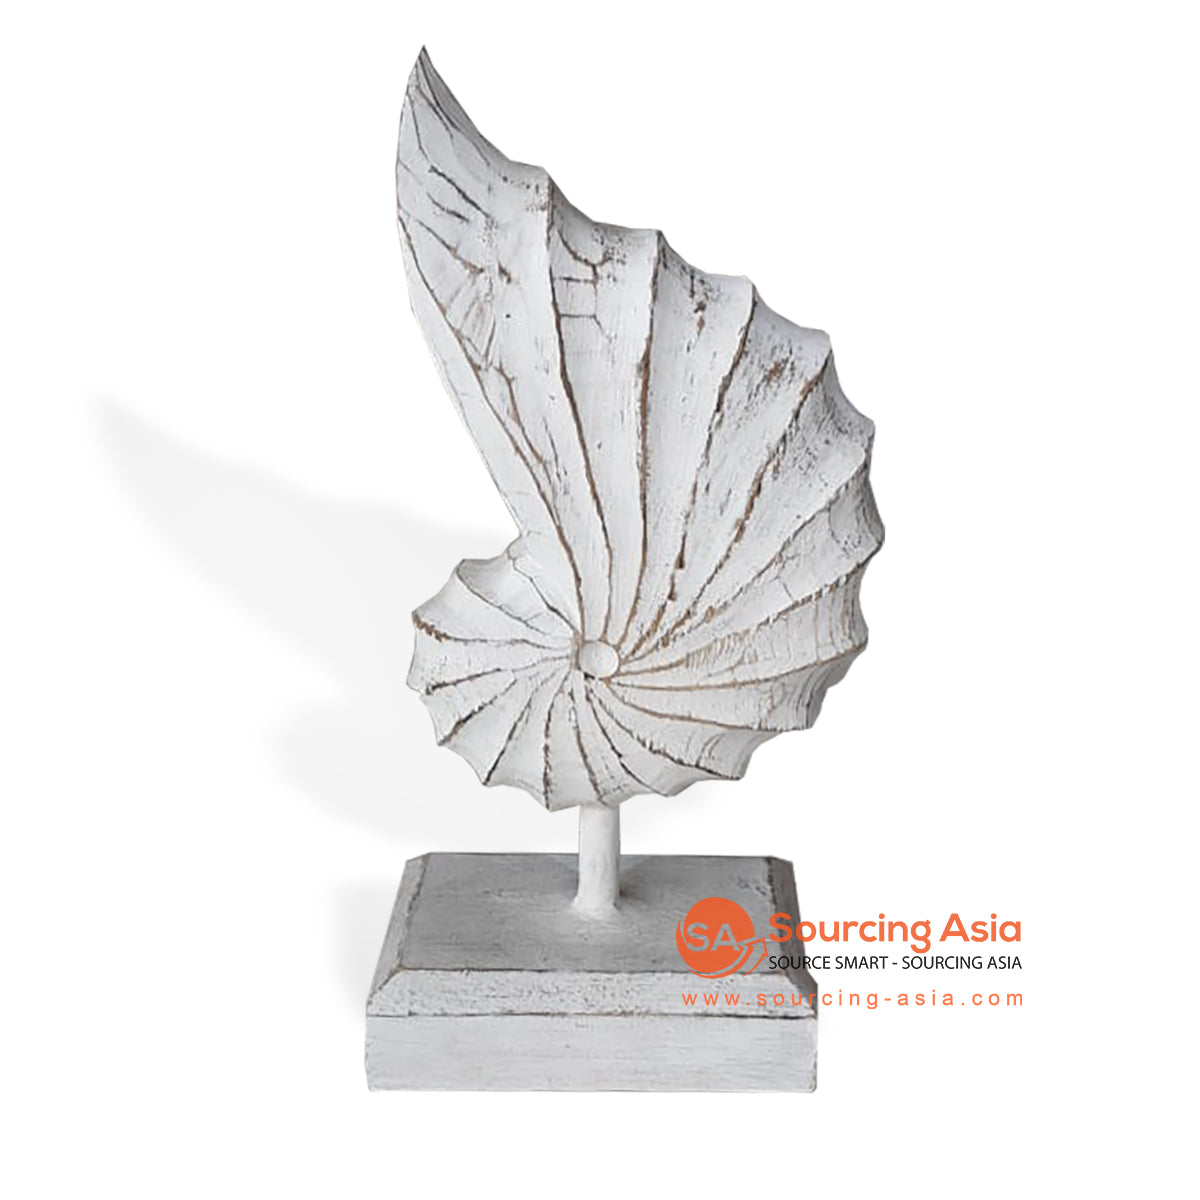 SLG005 WHITE WASH WOODEN SHELL ON STAND DECORATION